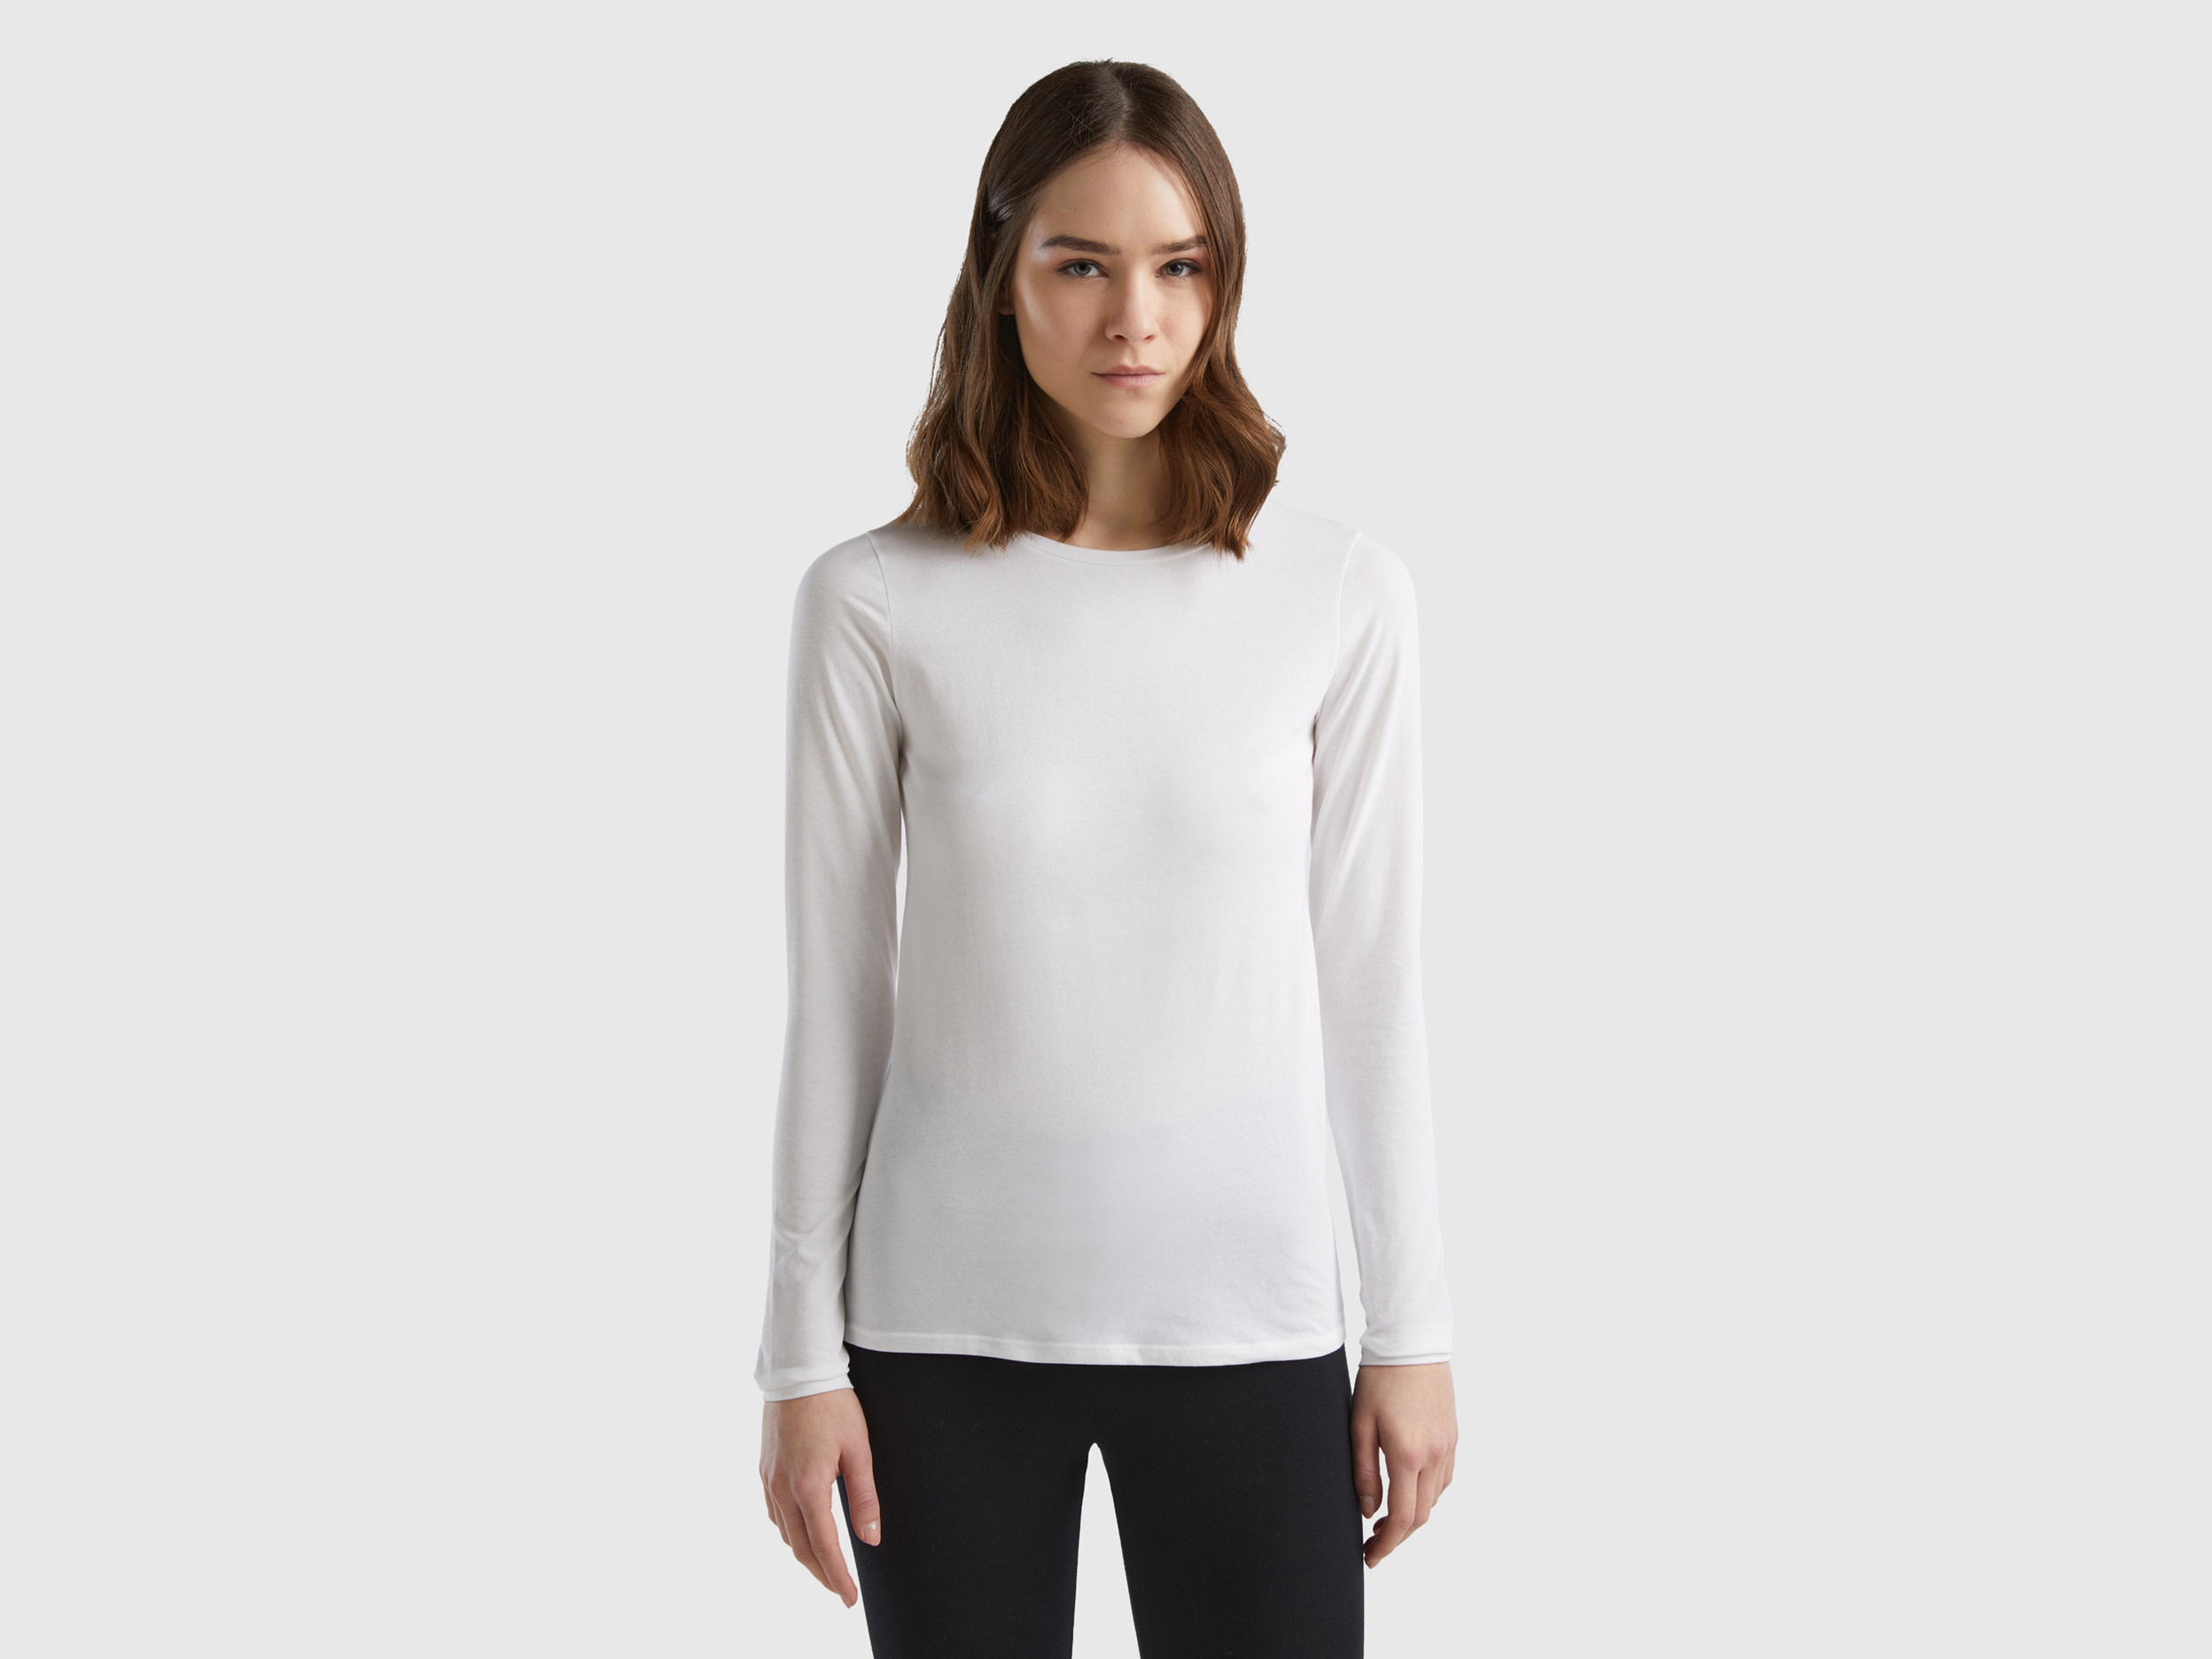 Image of Benetton, Long Sleeve Super Stretch T-shirt, size L, White, Women